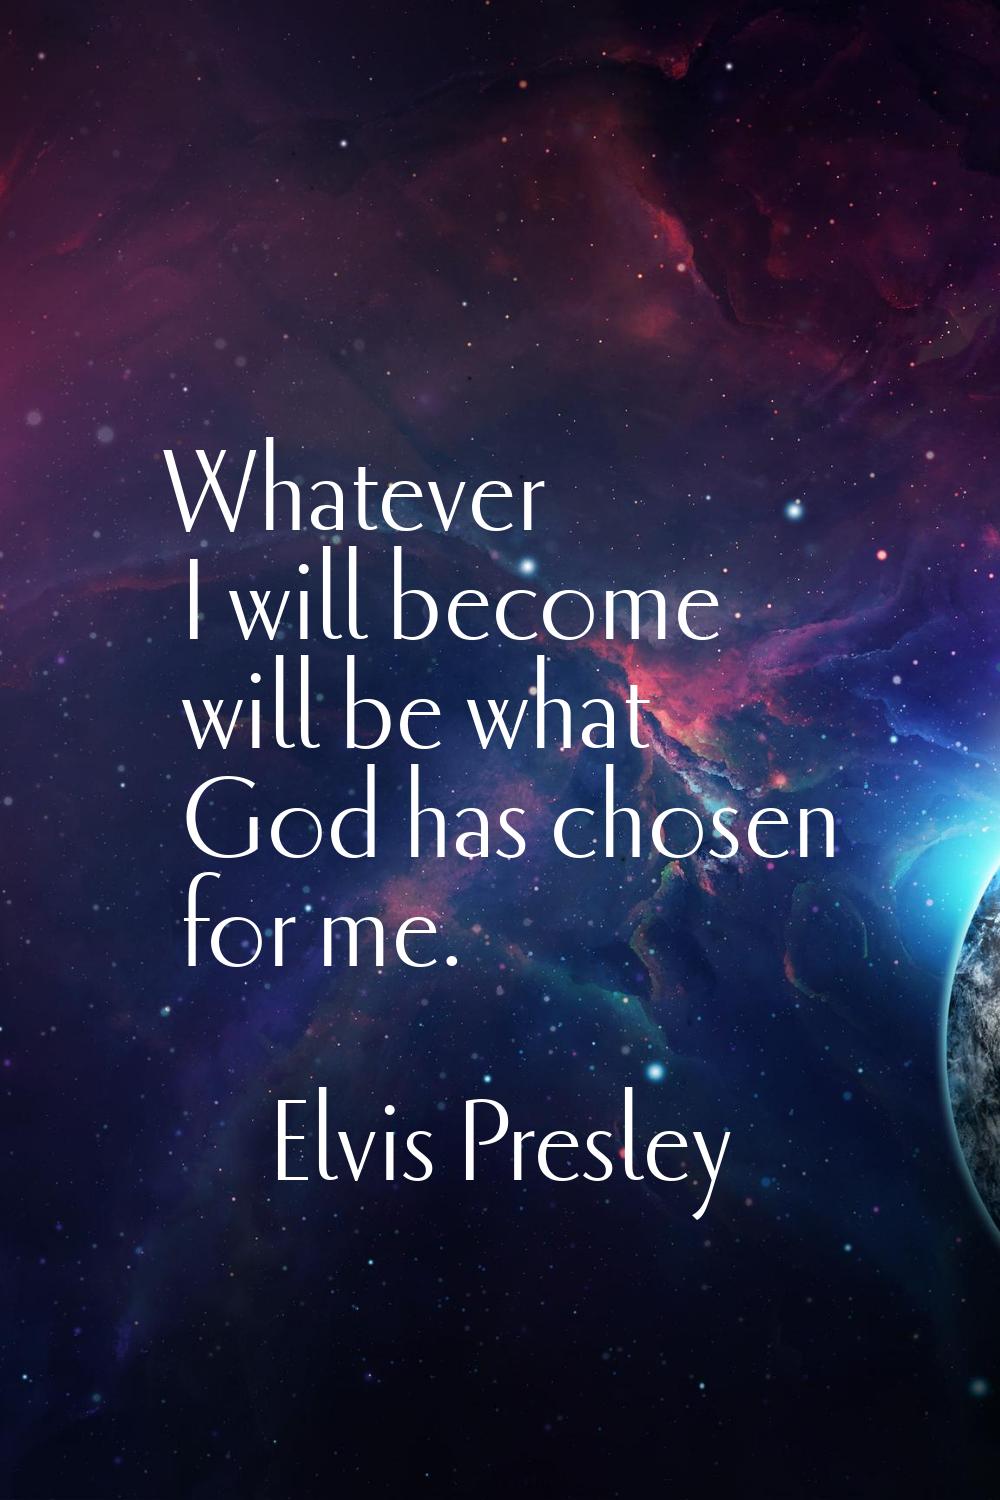 Whatever I will become will be what God has chosen for me.